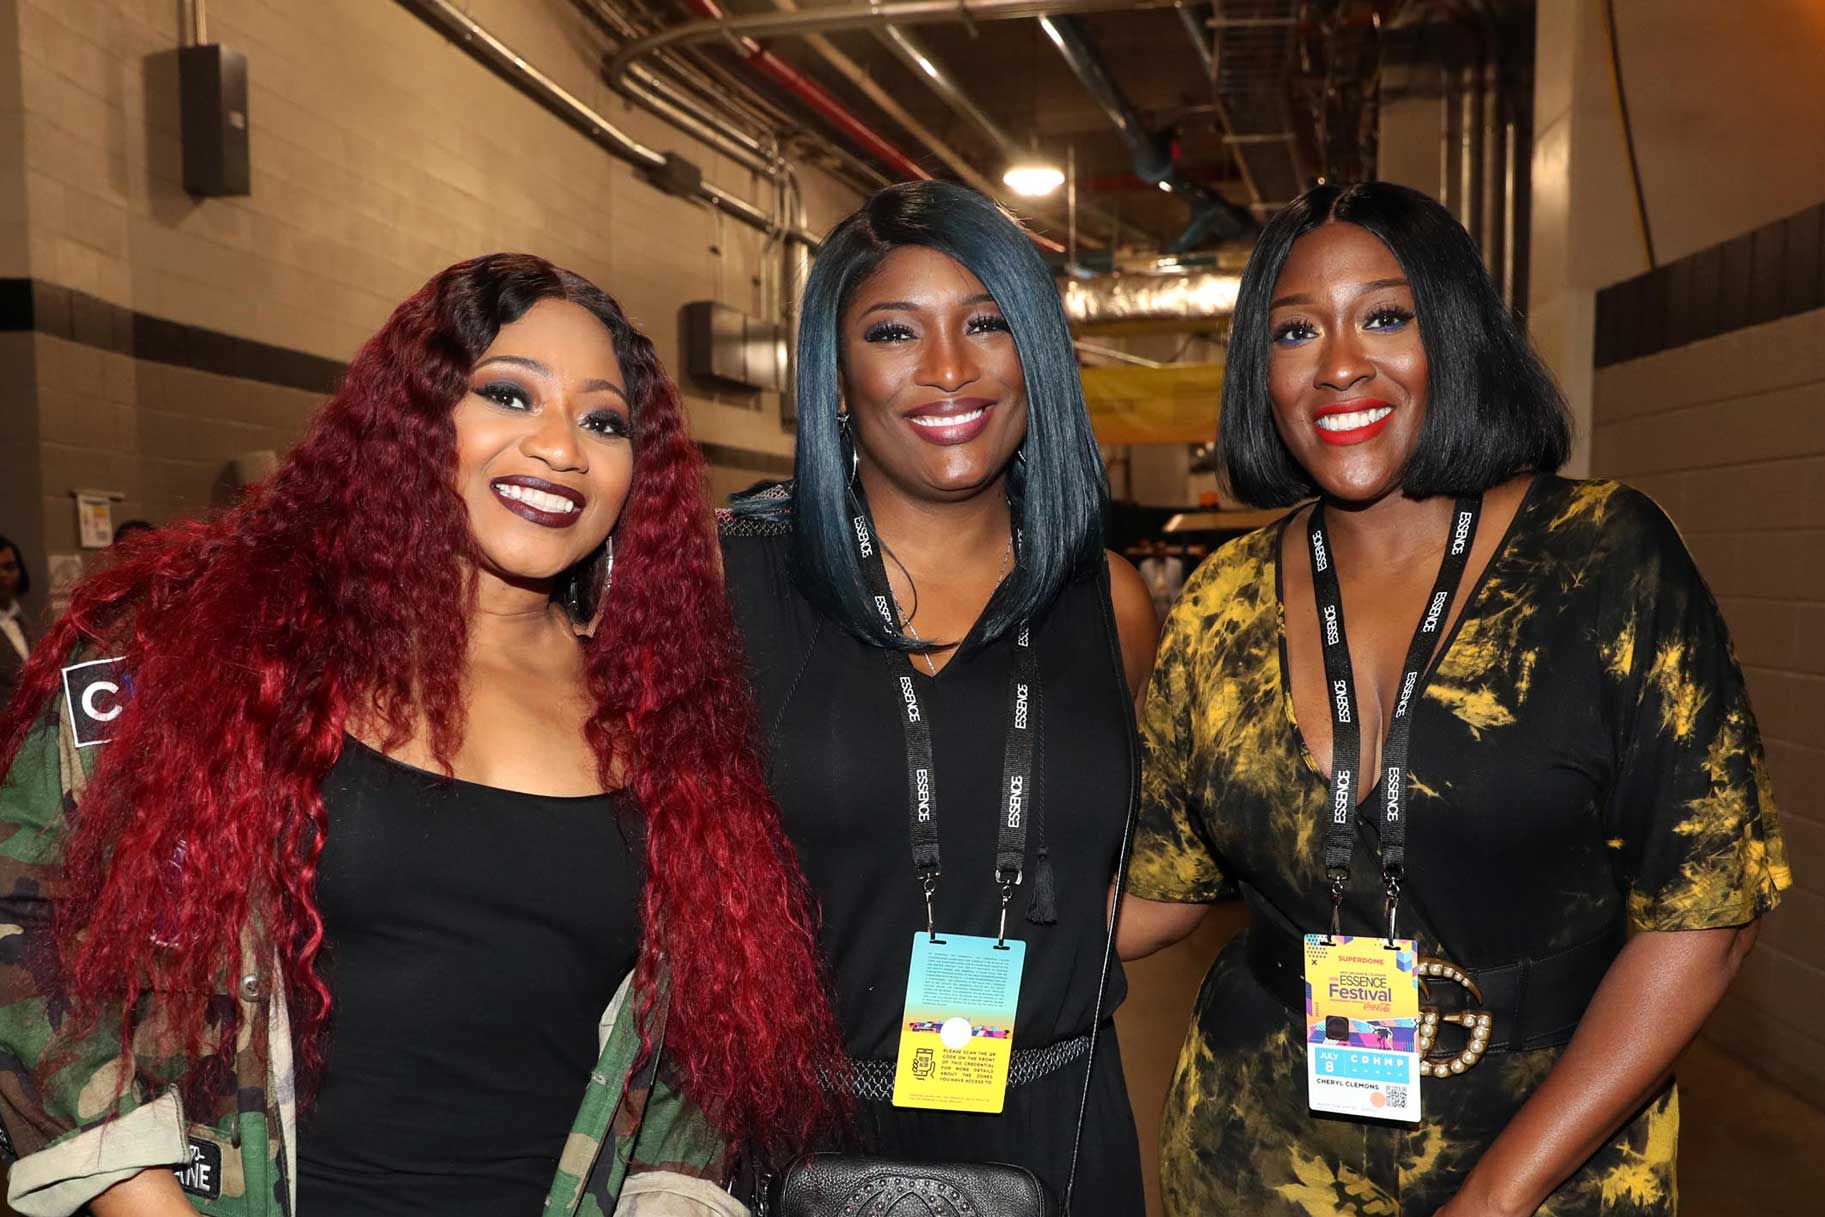 What's Next For SWV After Collaboration With XSCAPE? The Daily Dish